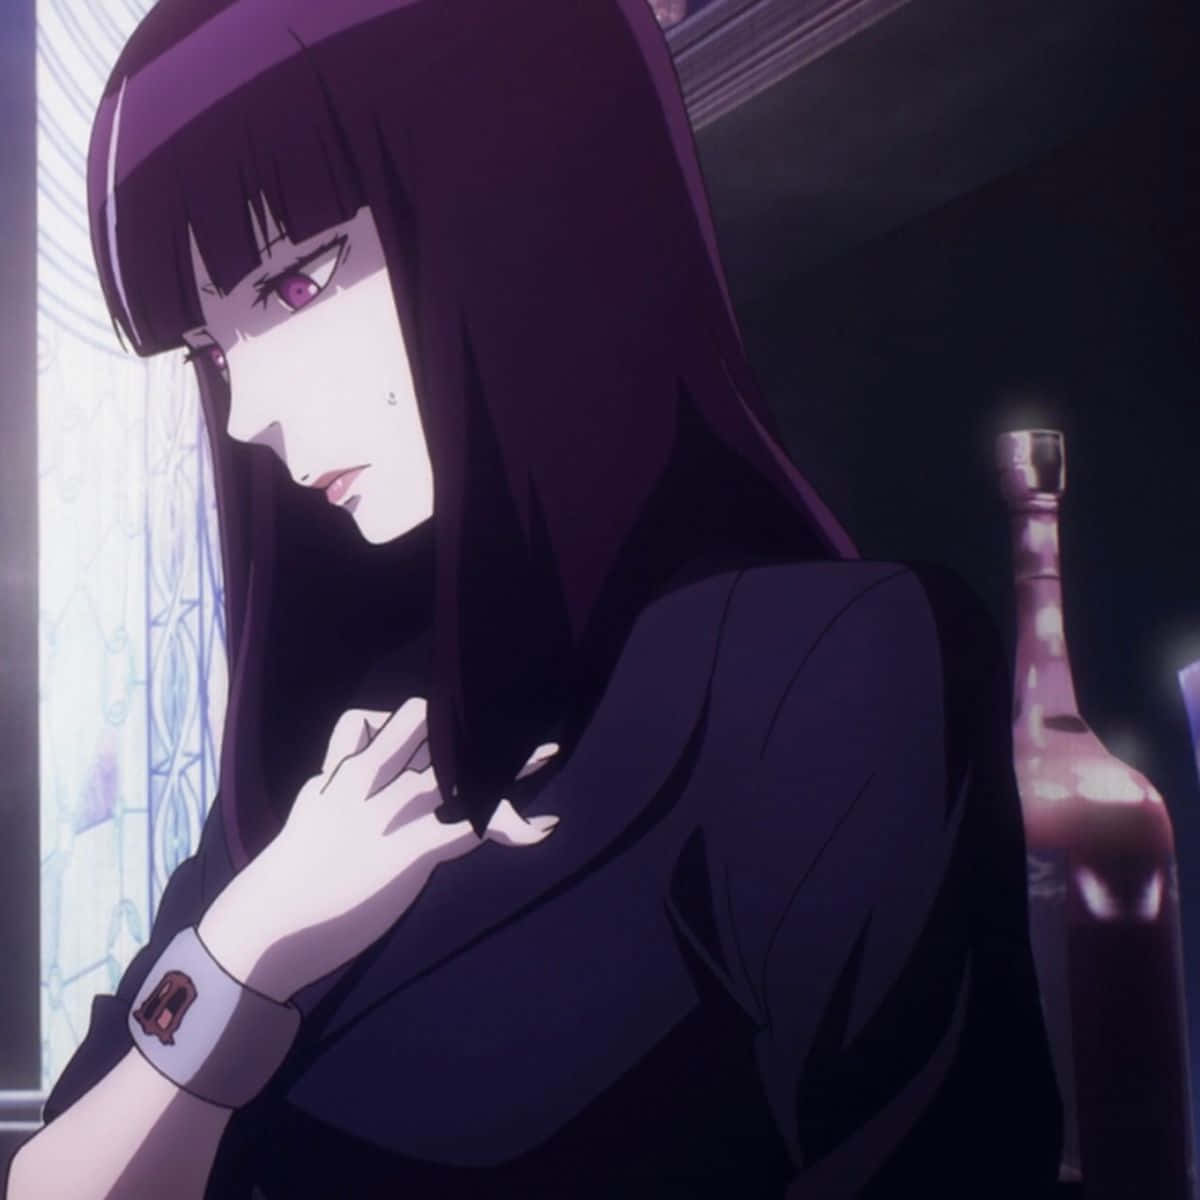 "chiyuki From Death Parade: A Portrait Of Sorrow And Strength" Wallpaper